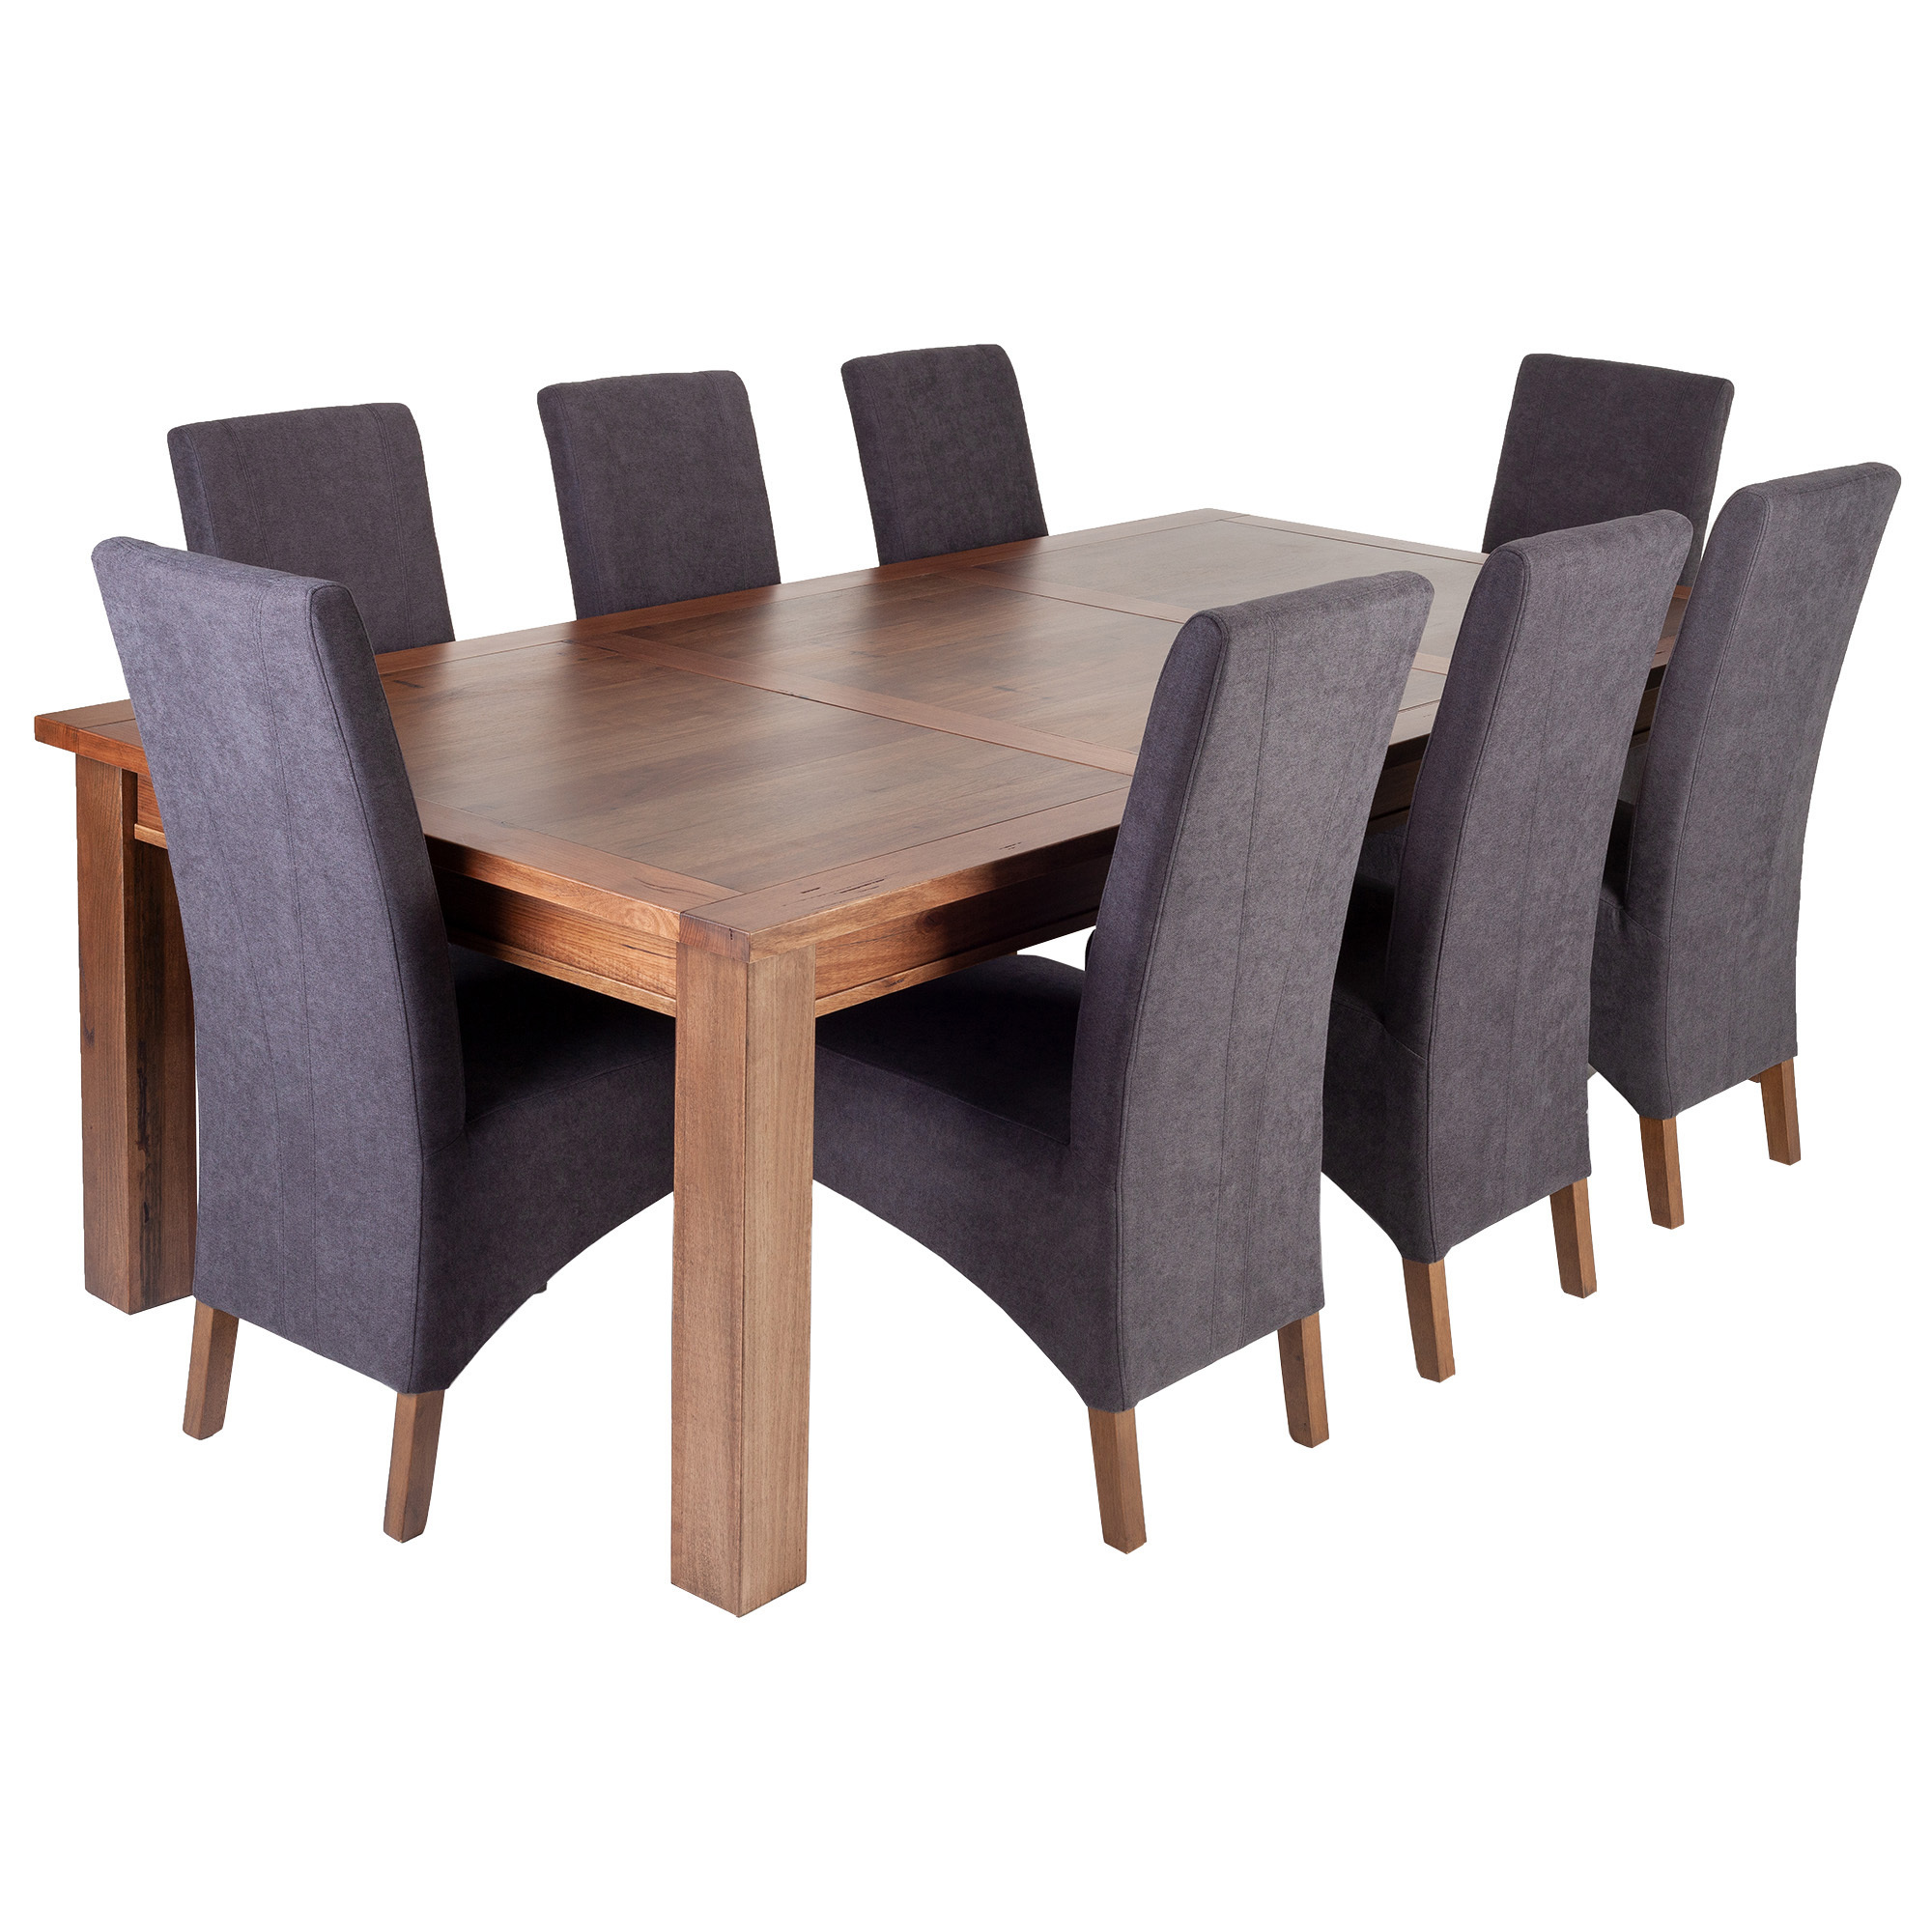 Natural with Grey Panana Wooden Dining Table Set With 2 Chairs in Choice of Colours Dining Room Furniture Set 